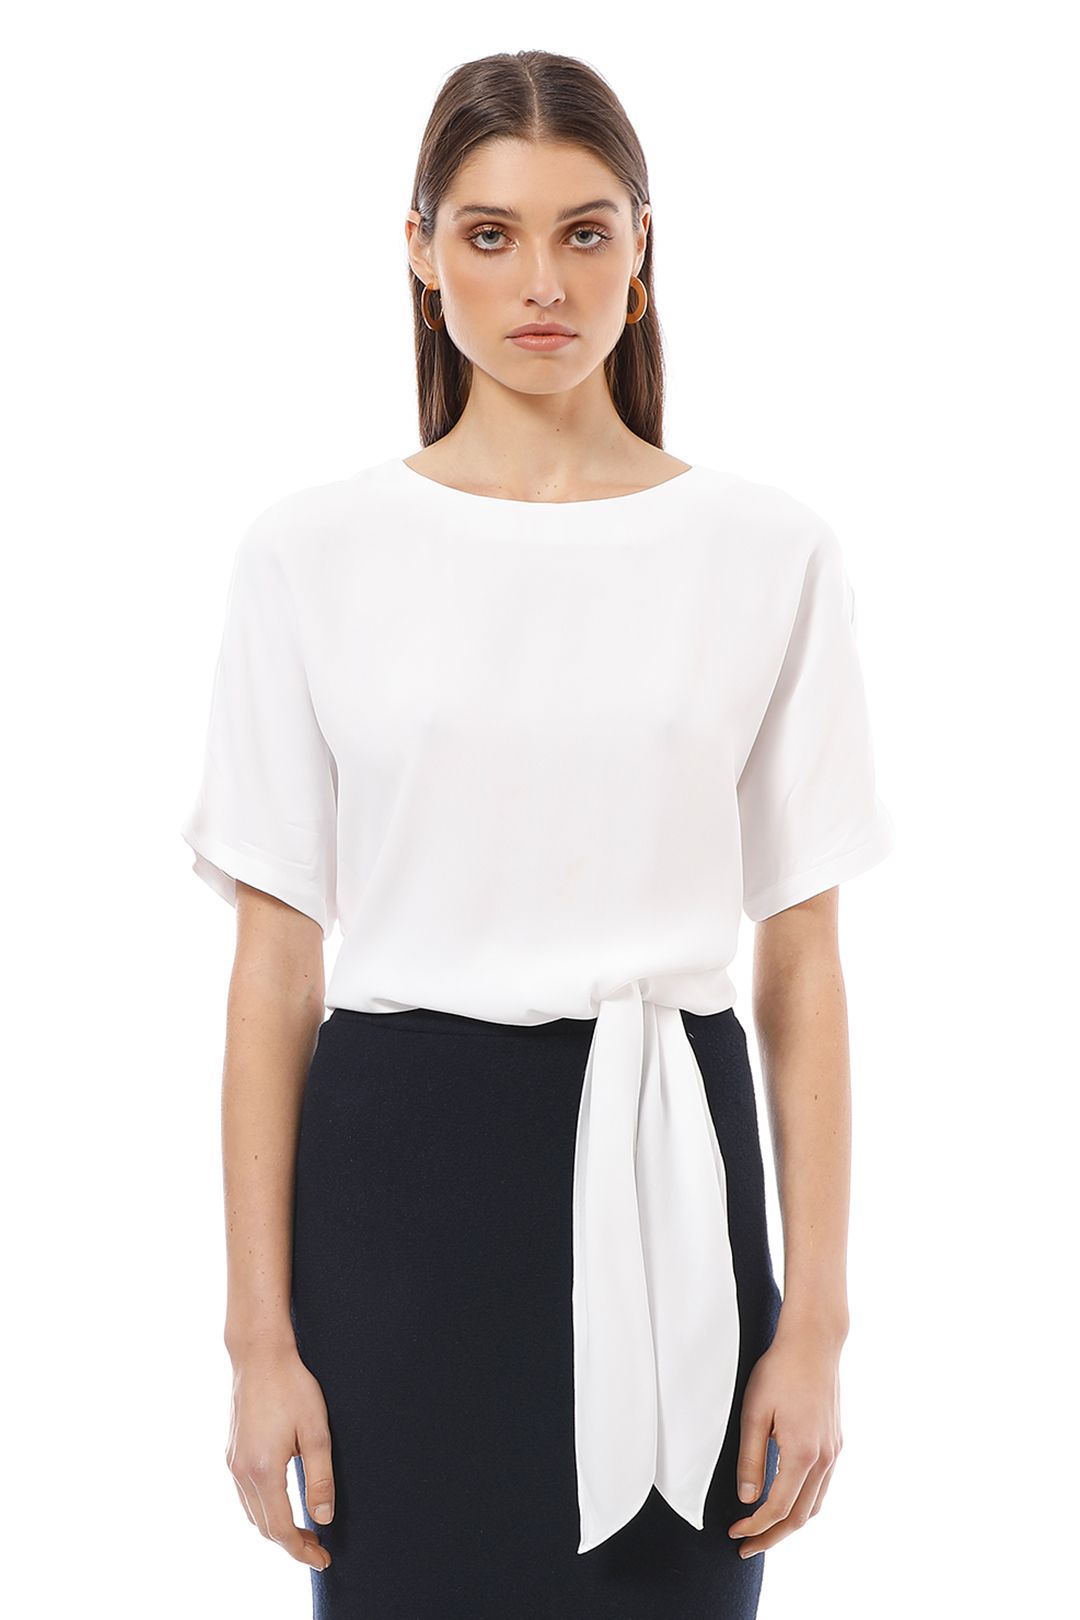 Saba - Carrie Tie Top - White - Front Detail